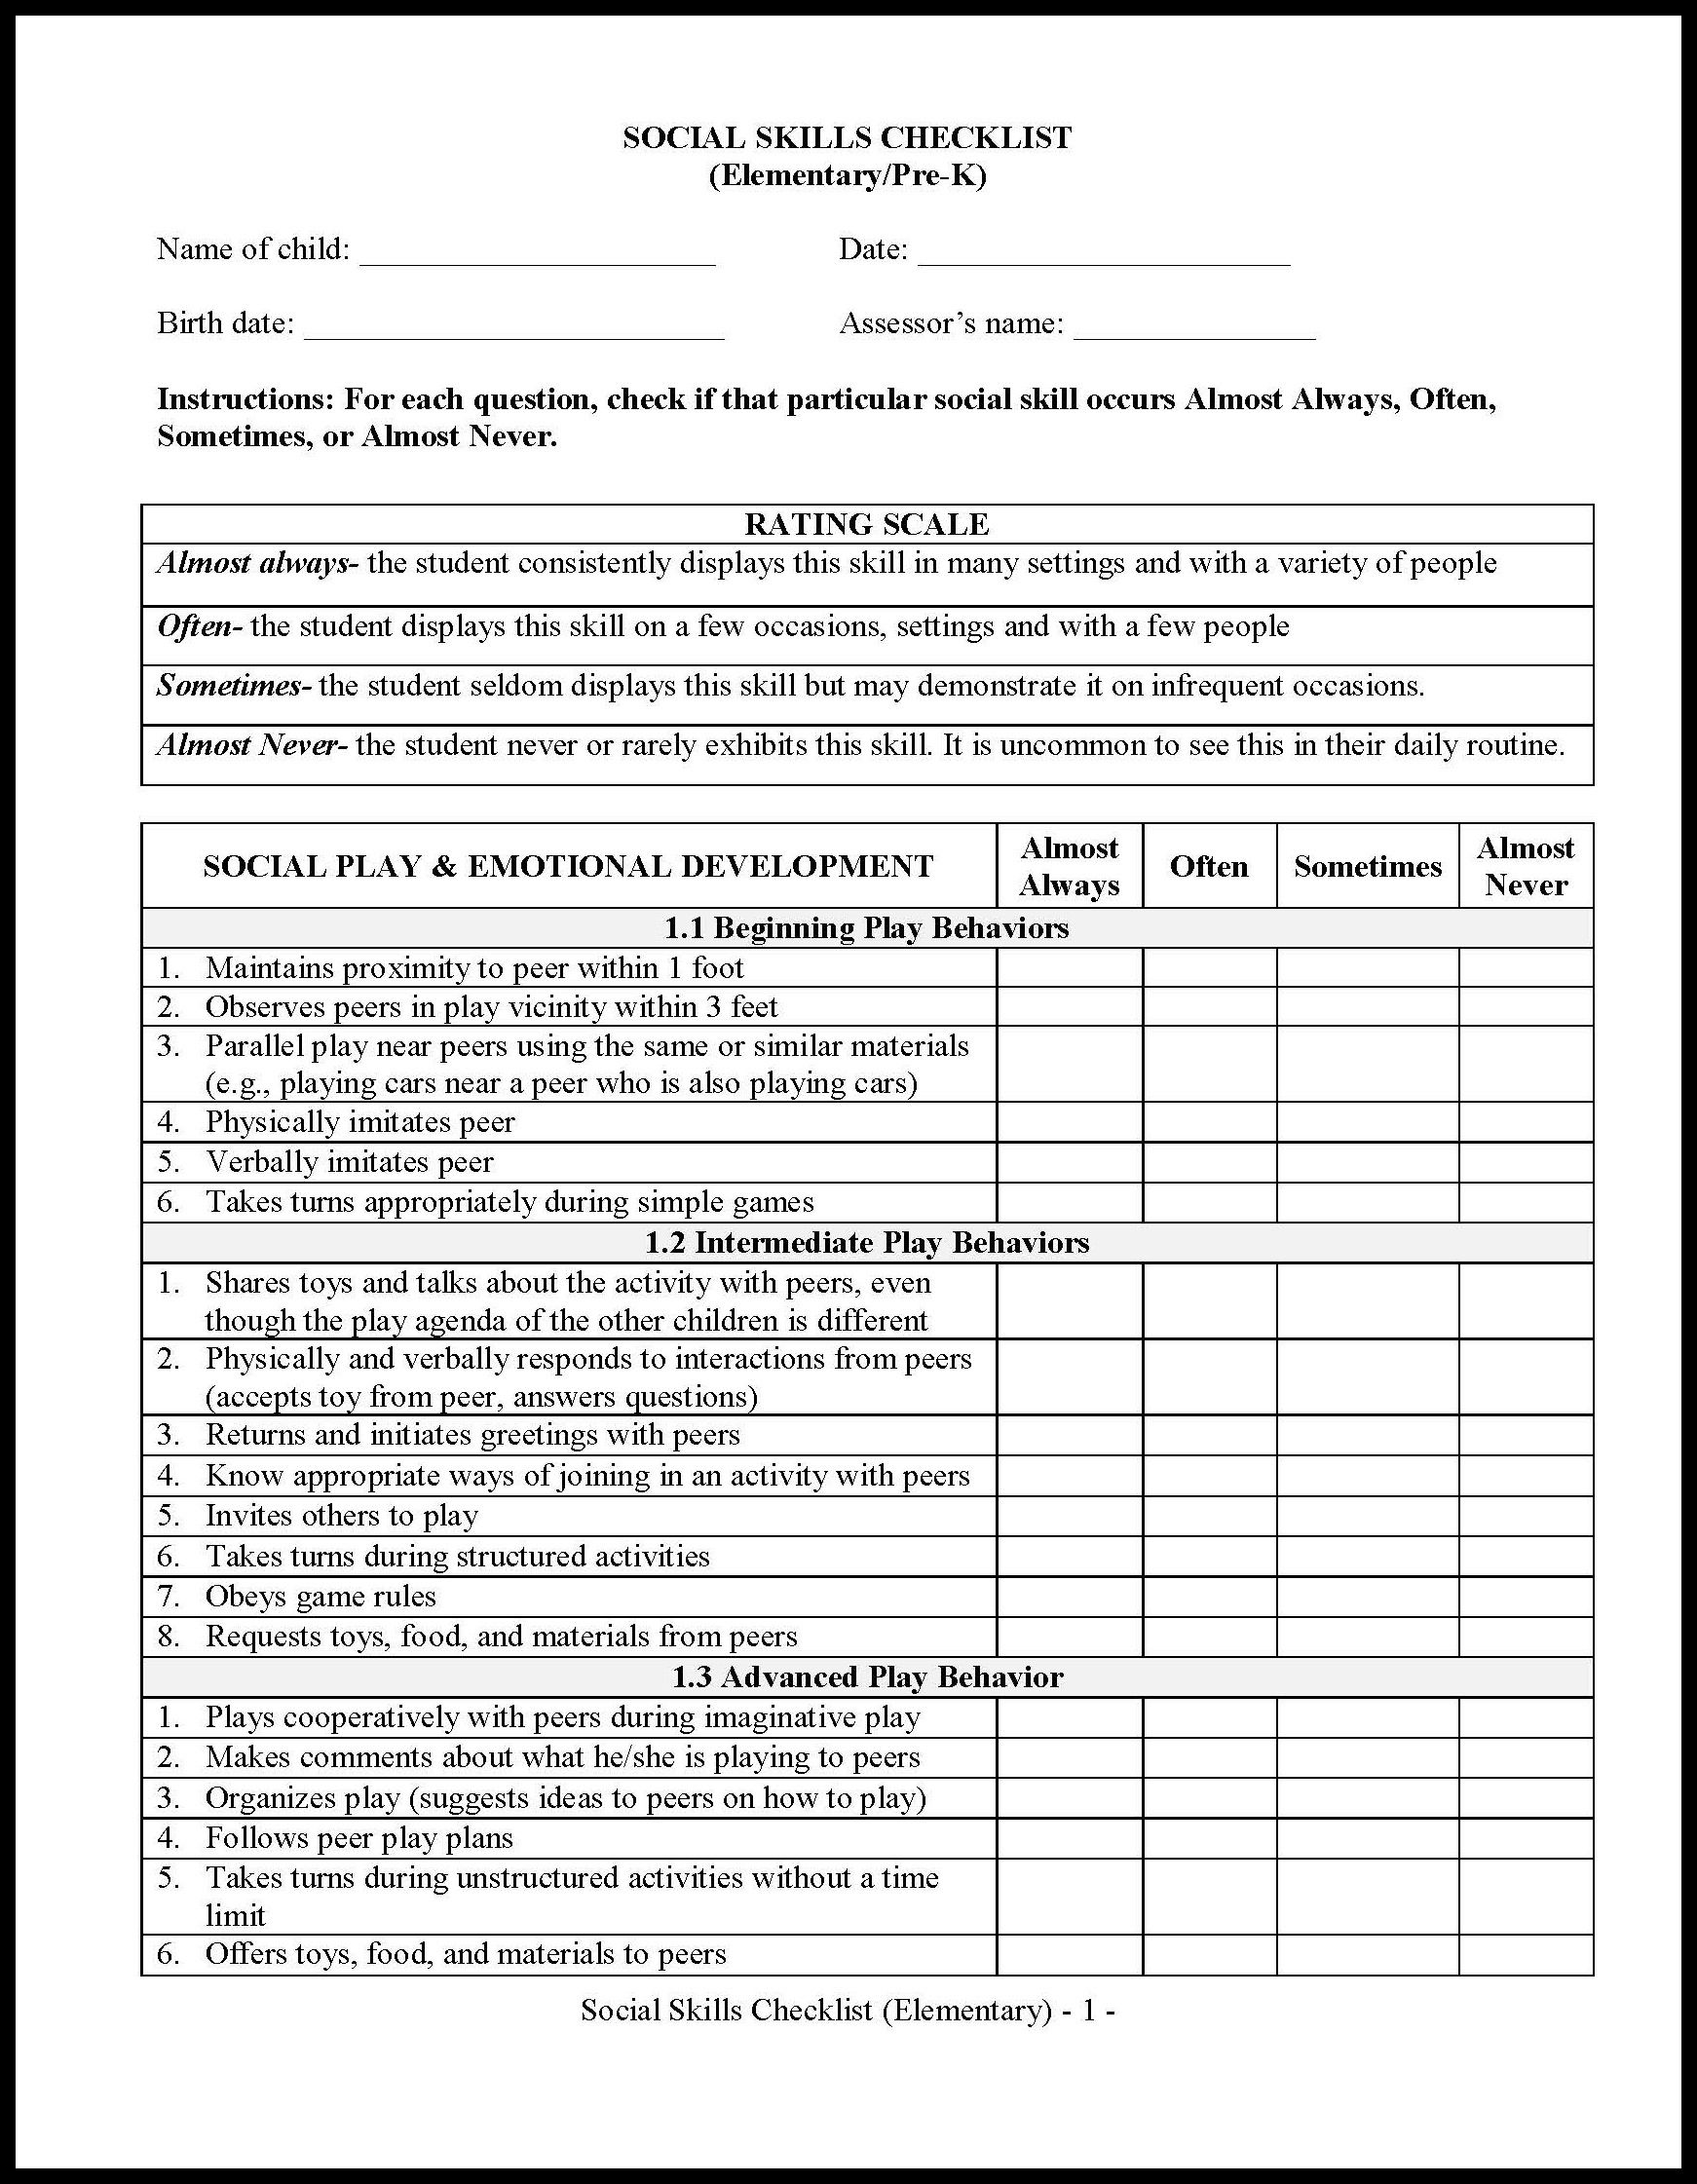 coping strategies questionnaire form